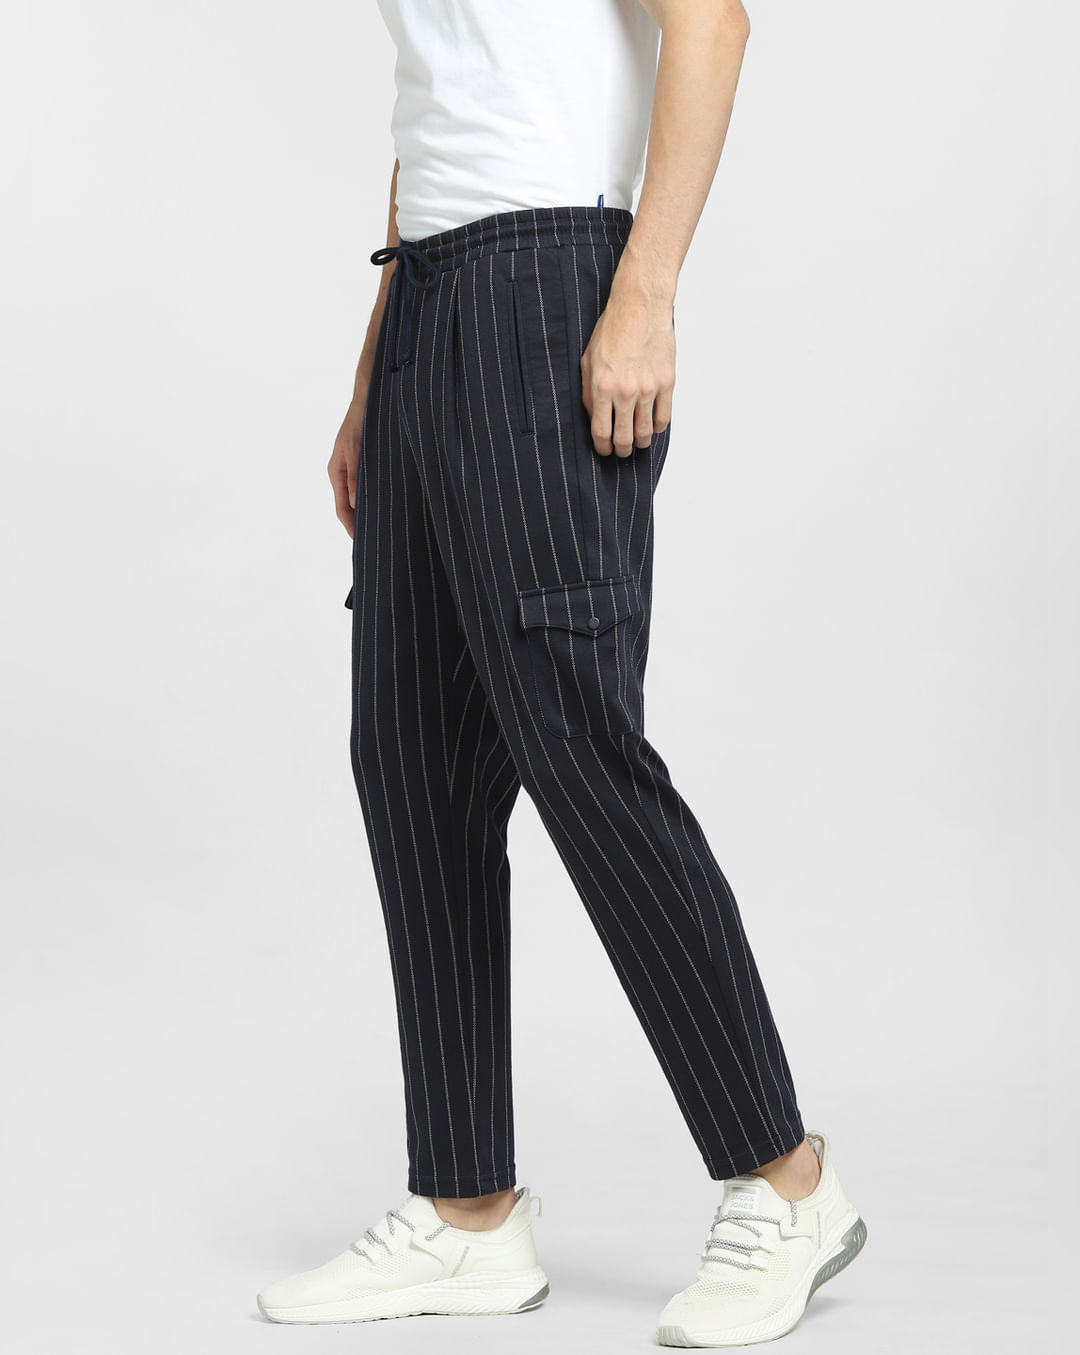 Buy Men Navy Blue Striped Co-ord Cargo Pants Online In India